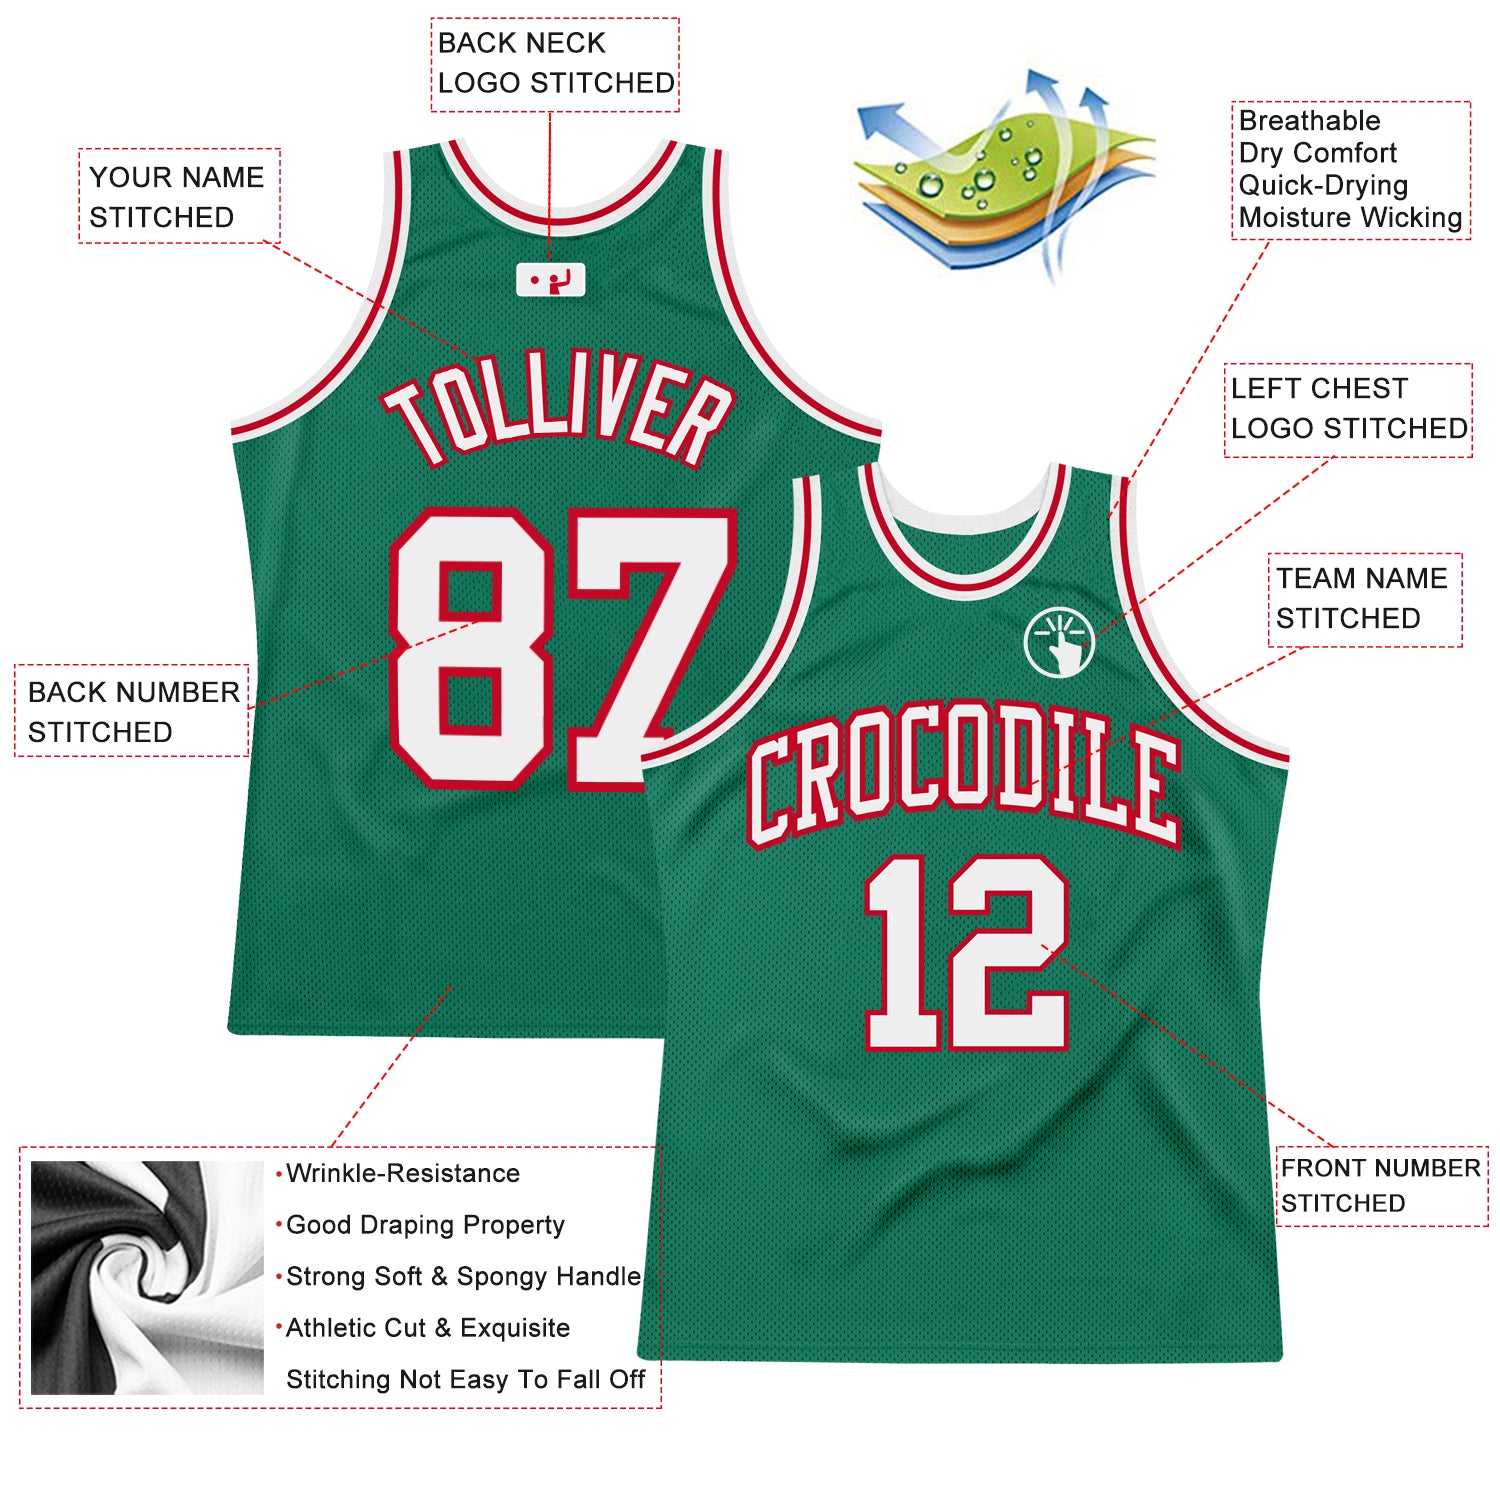 Custom Kelly Green White-Red Authentic Throwback Basketball Jersey